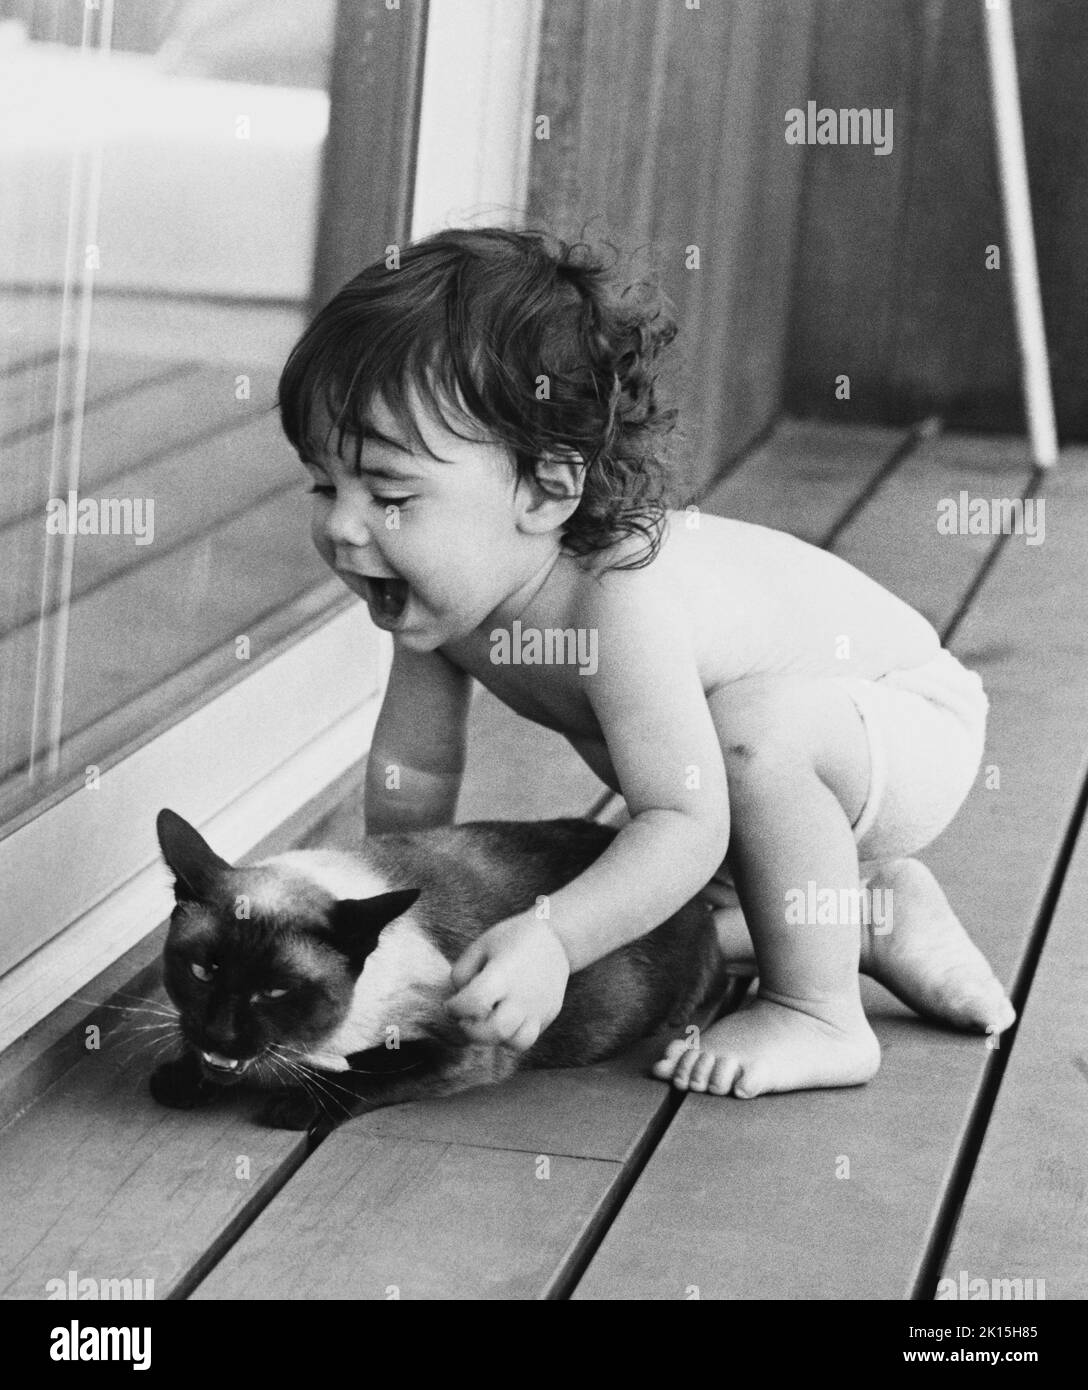 Baby boy prepares to attack his cat. Stock Photo